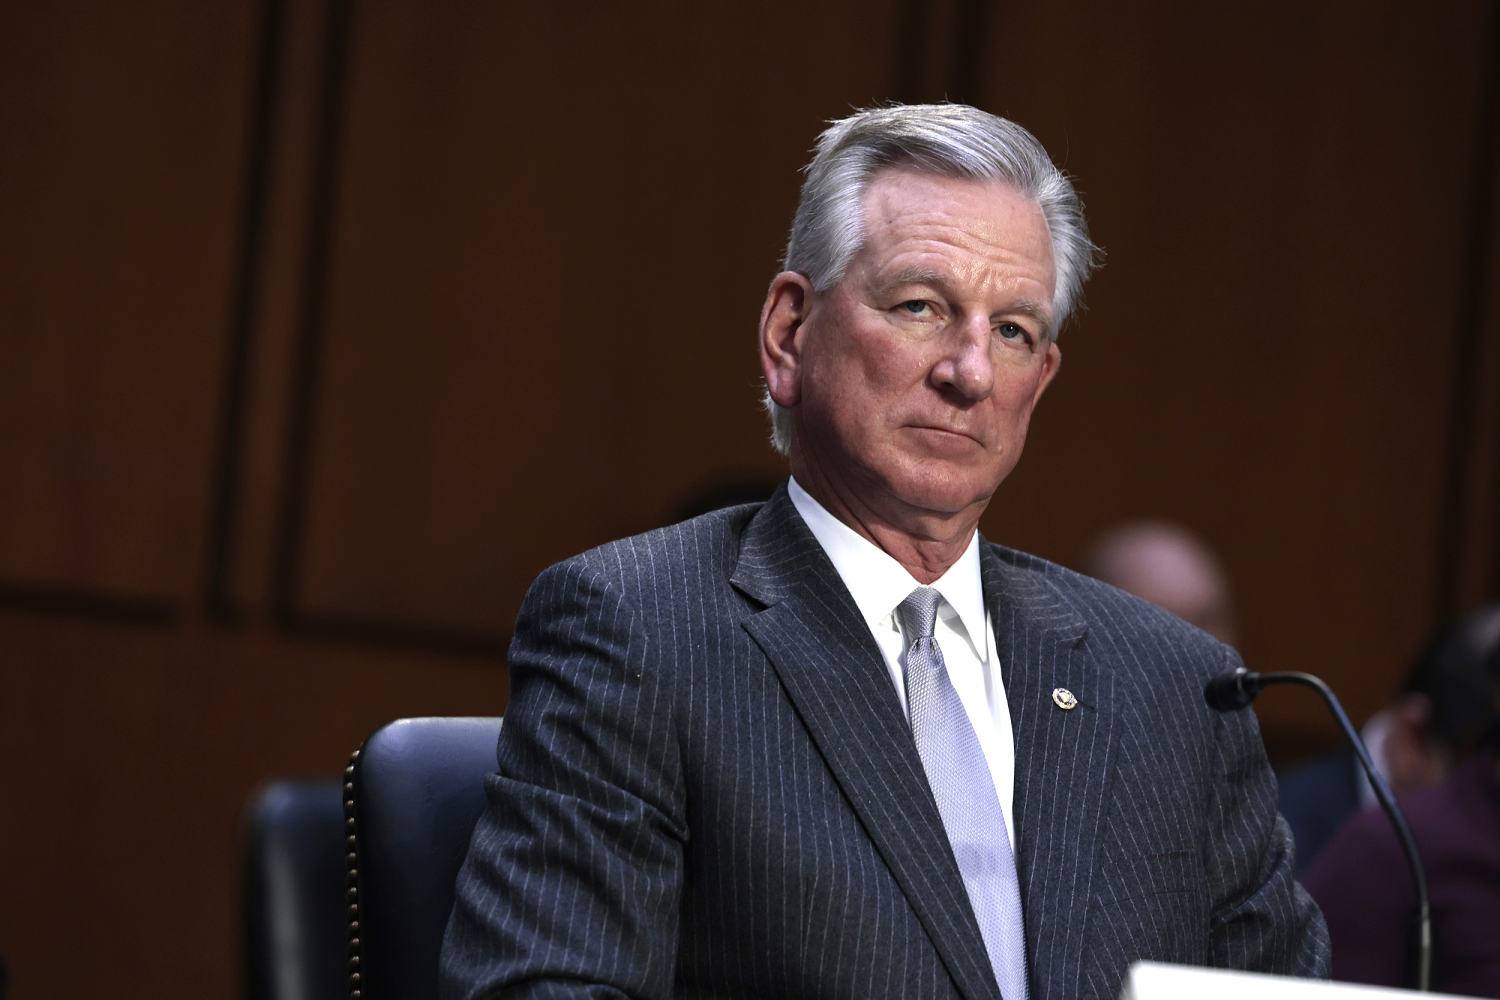 Tommy Tuberville accuses Dems of being part of ‘a Satanic cult’